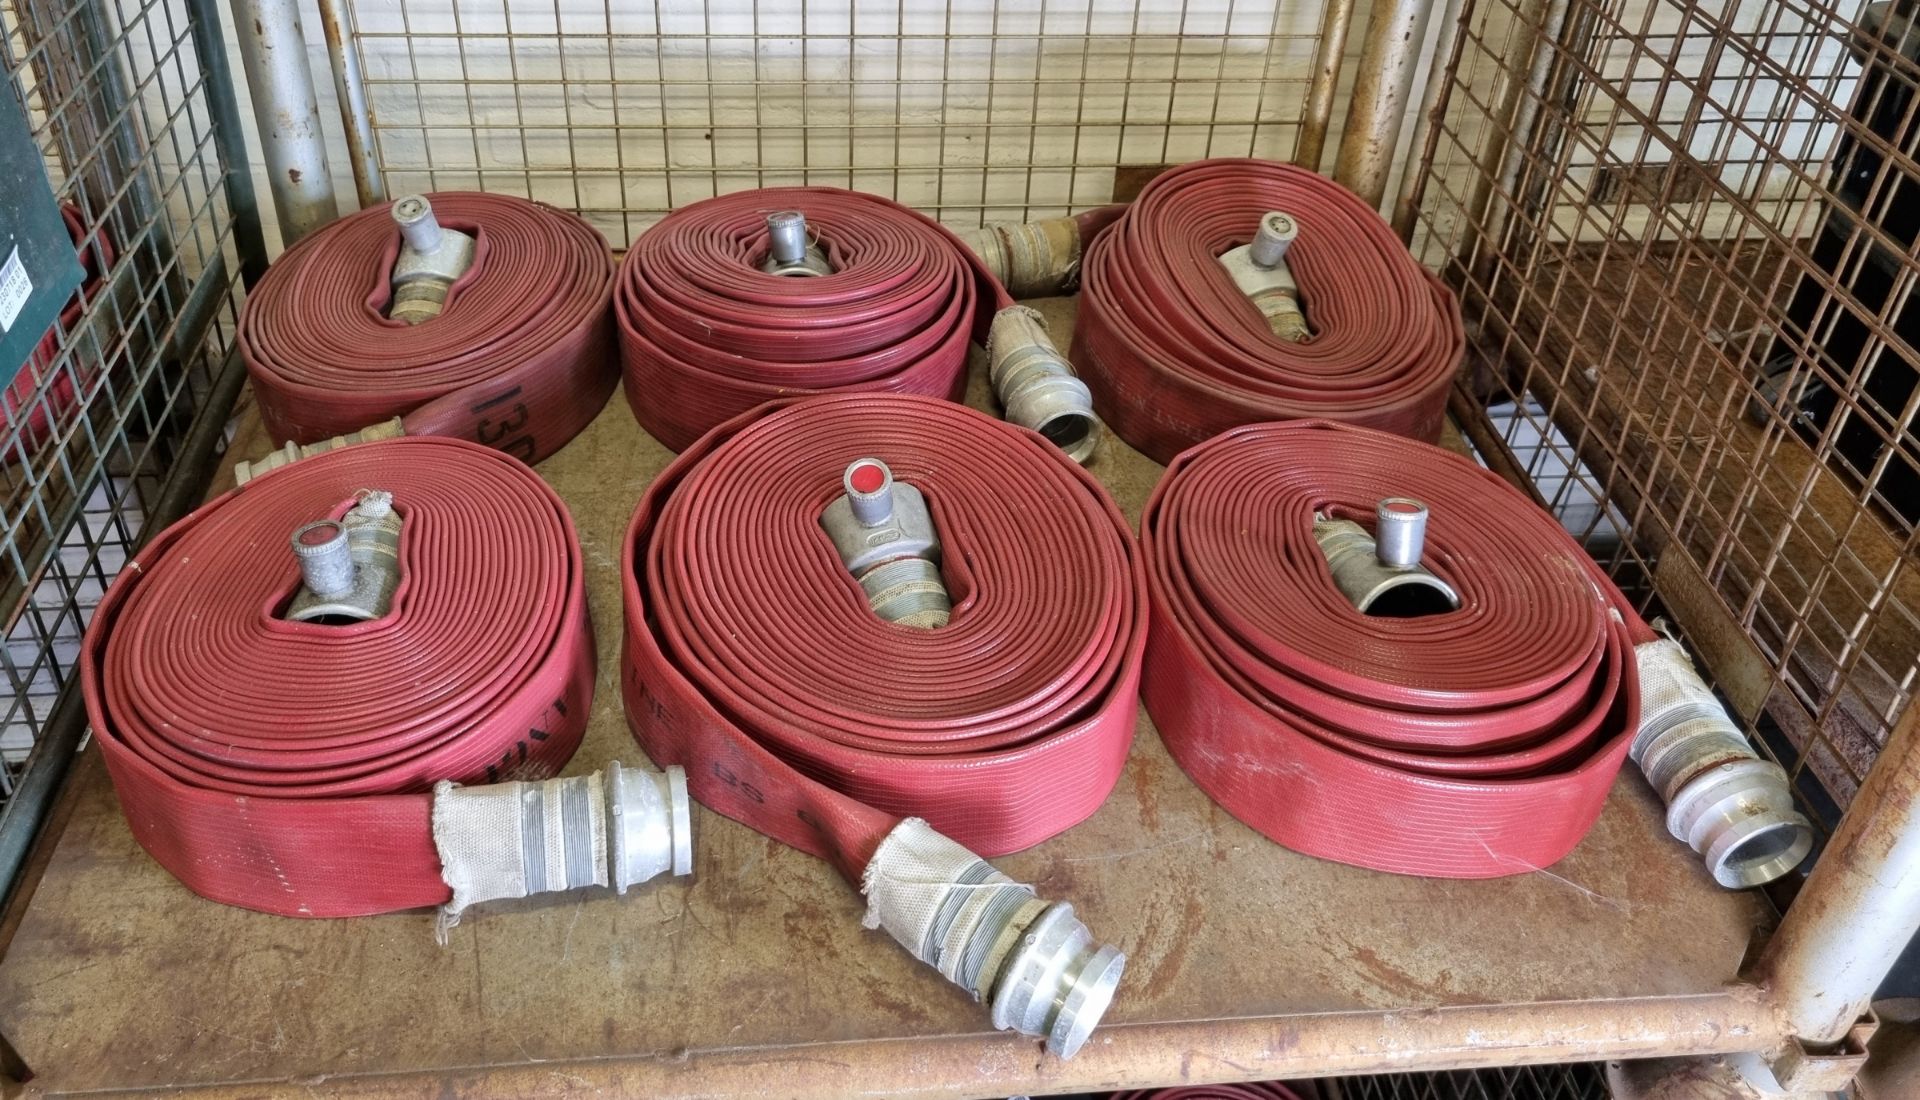 6x Angus Duraline 64mm lay flat hoses with couplings - approx 15m in length - Bild 2 aus 5